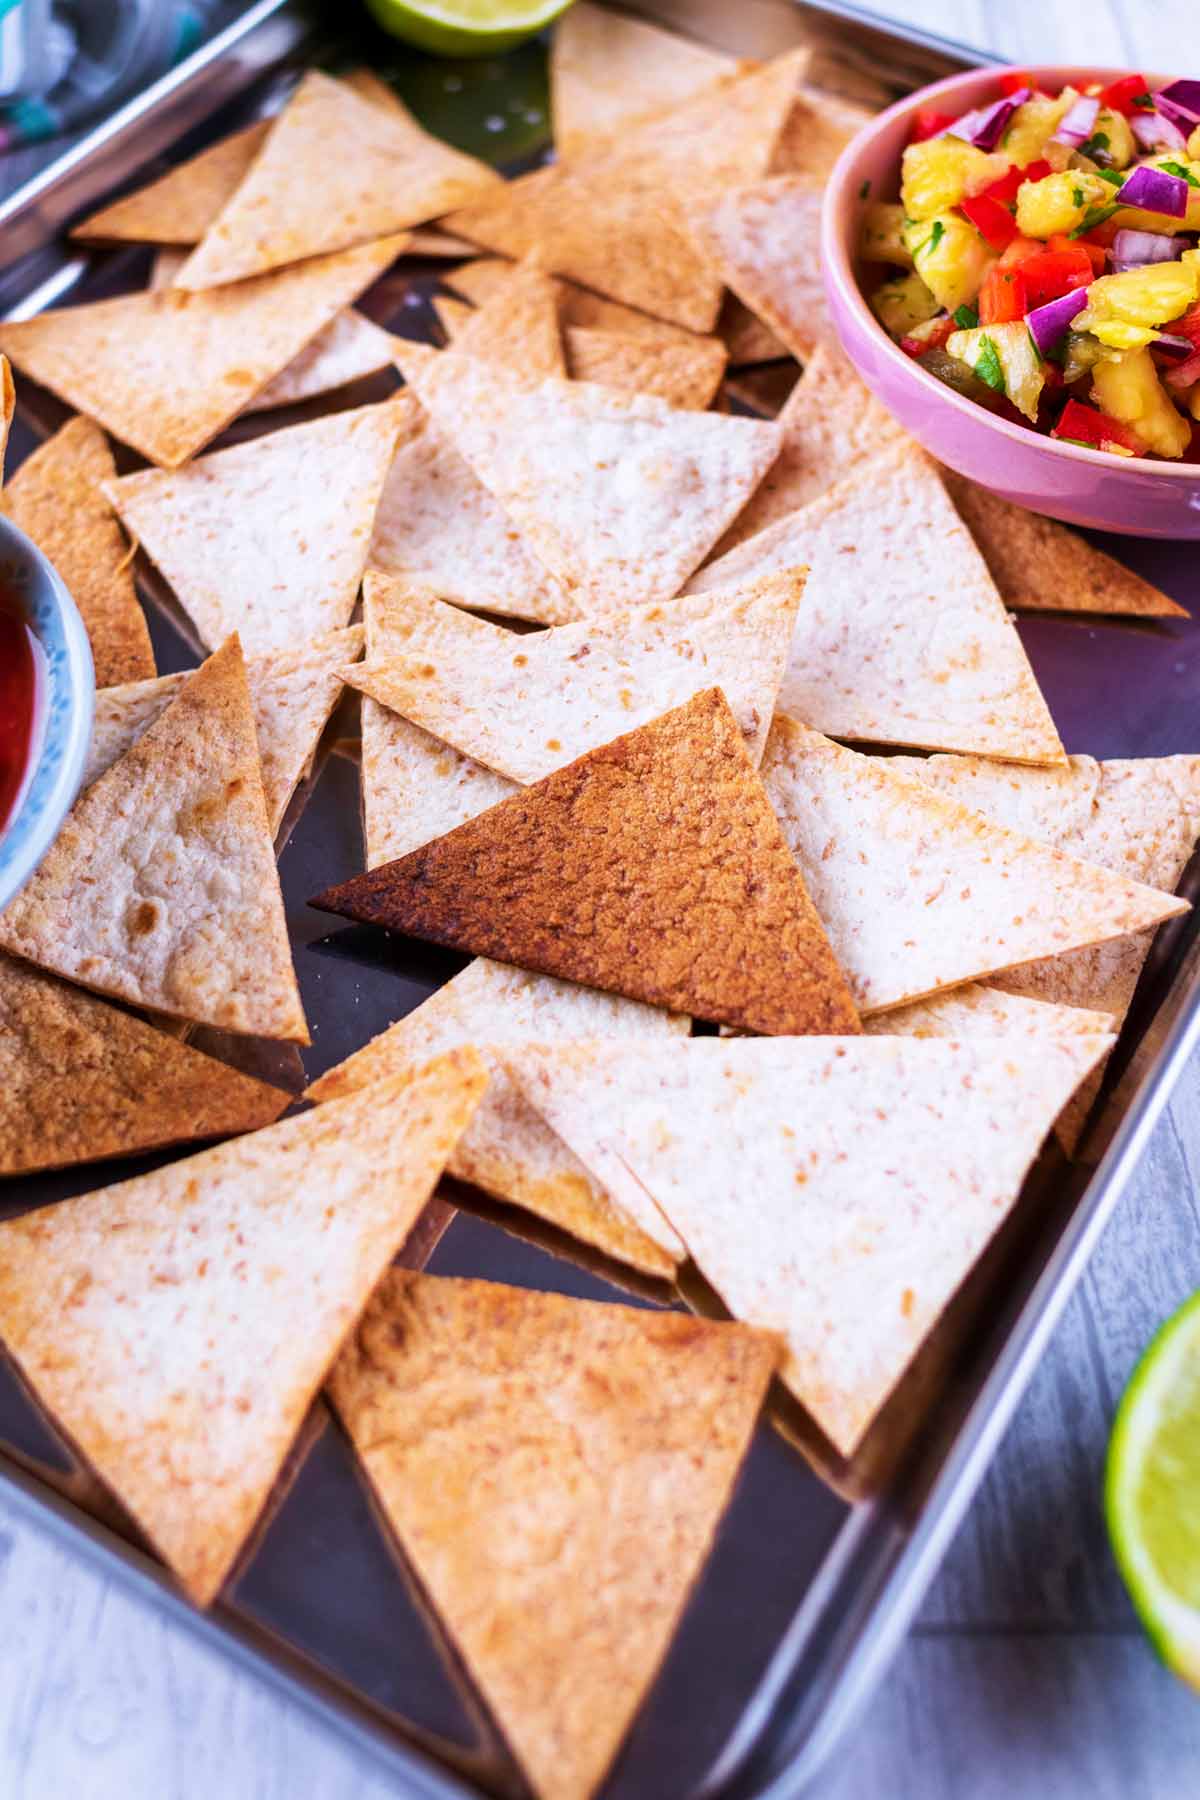 A steel tray covered in tortilla chips.